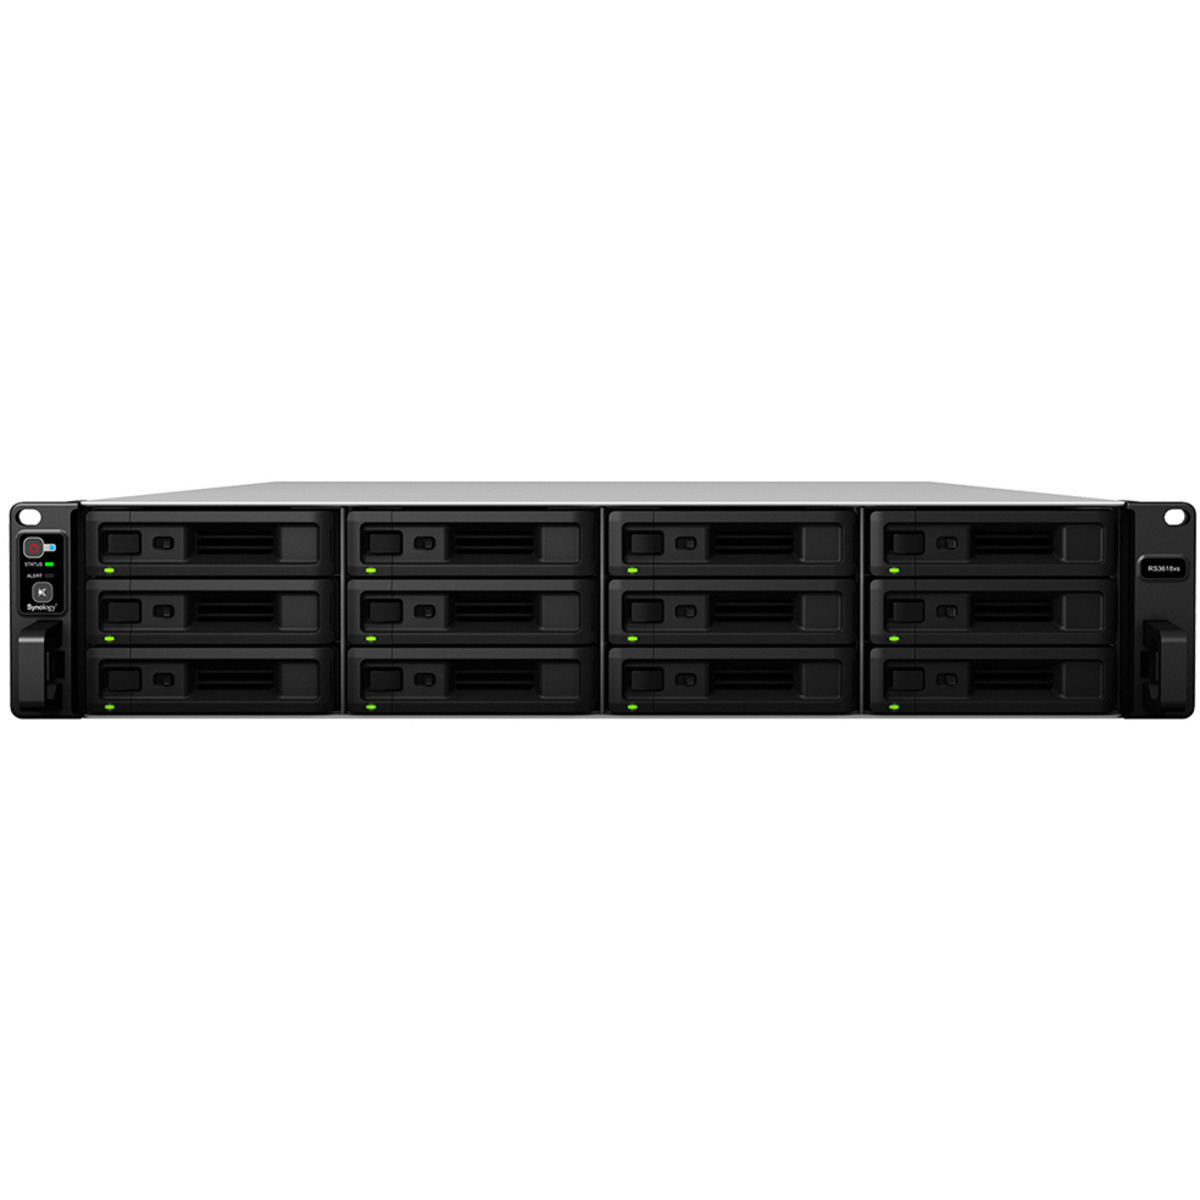 Synology RackStation RS3618xs 242tb 12-Bay RackMount Large Business / Enterprise NAS - Network Attached Storage Device 11x22tb Seagate IronWolf Pro ST22000NT001 3.5 7200rpm SATA 6Gb/s HDD NAS Class Drives Installed - Burn-In Tested RackStation RS3618xs